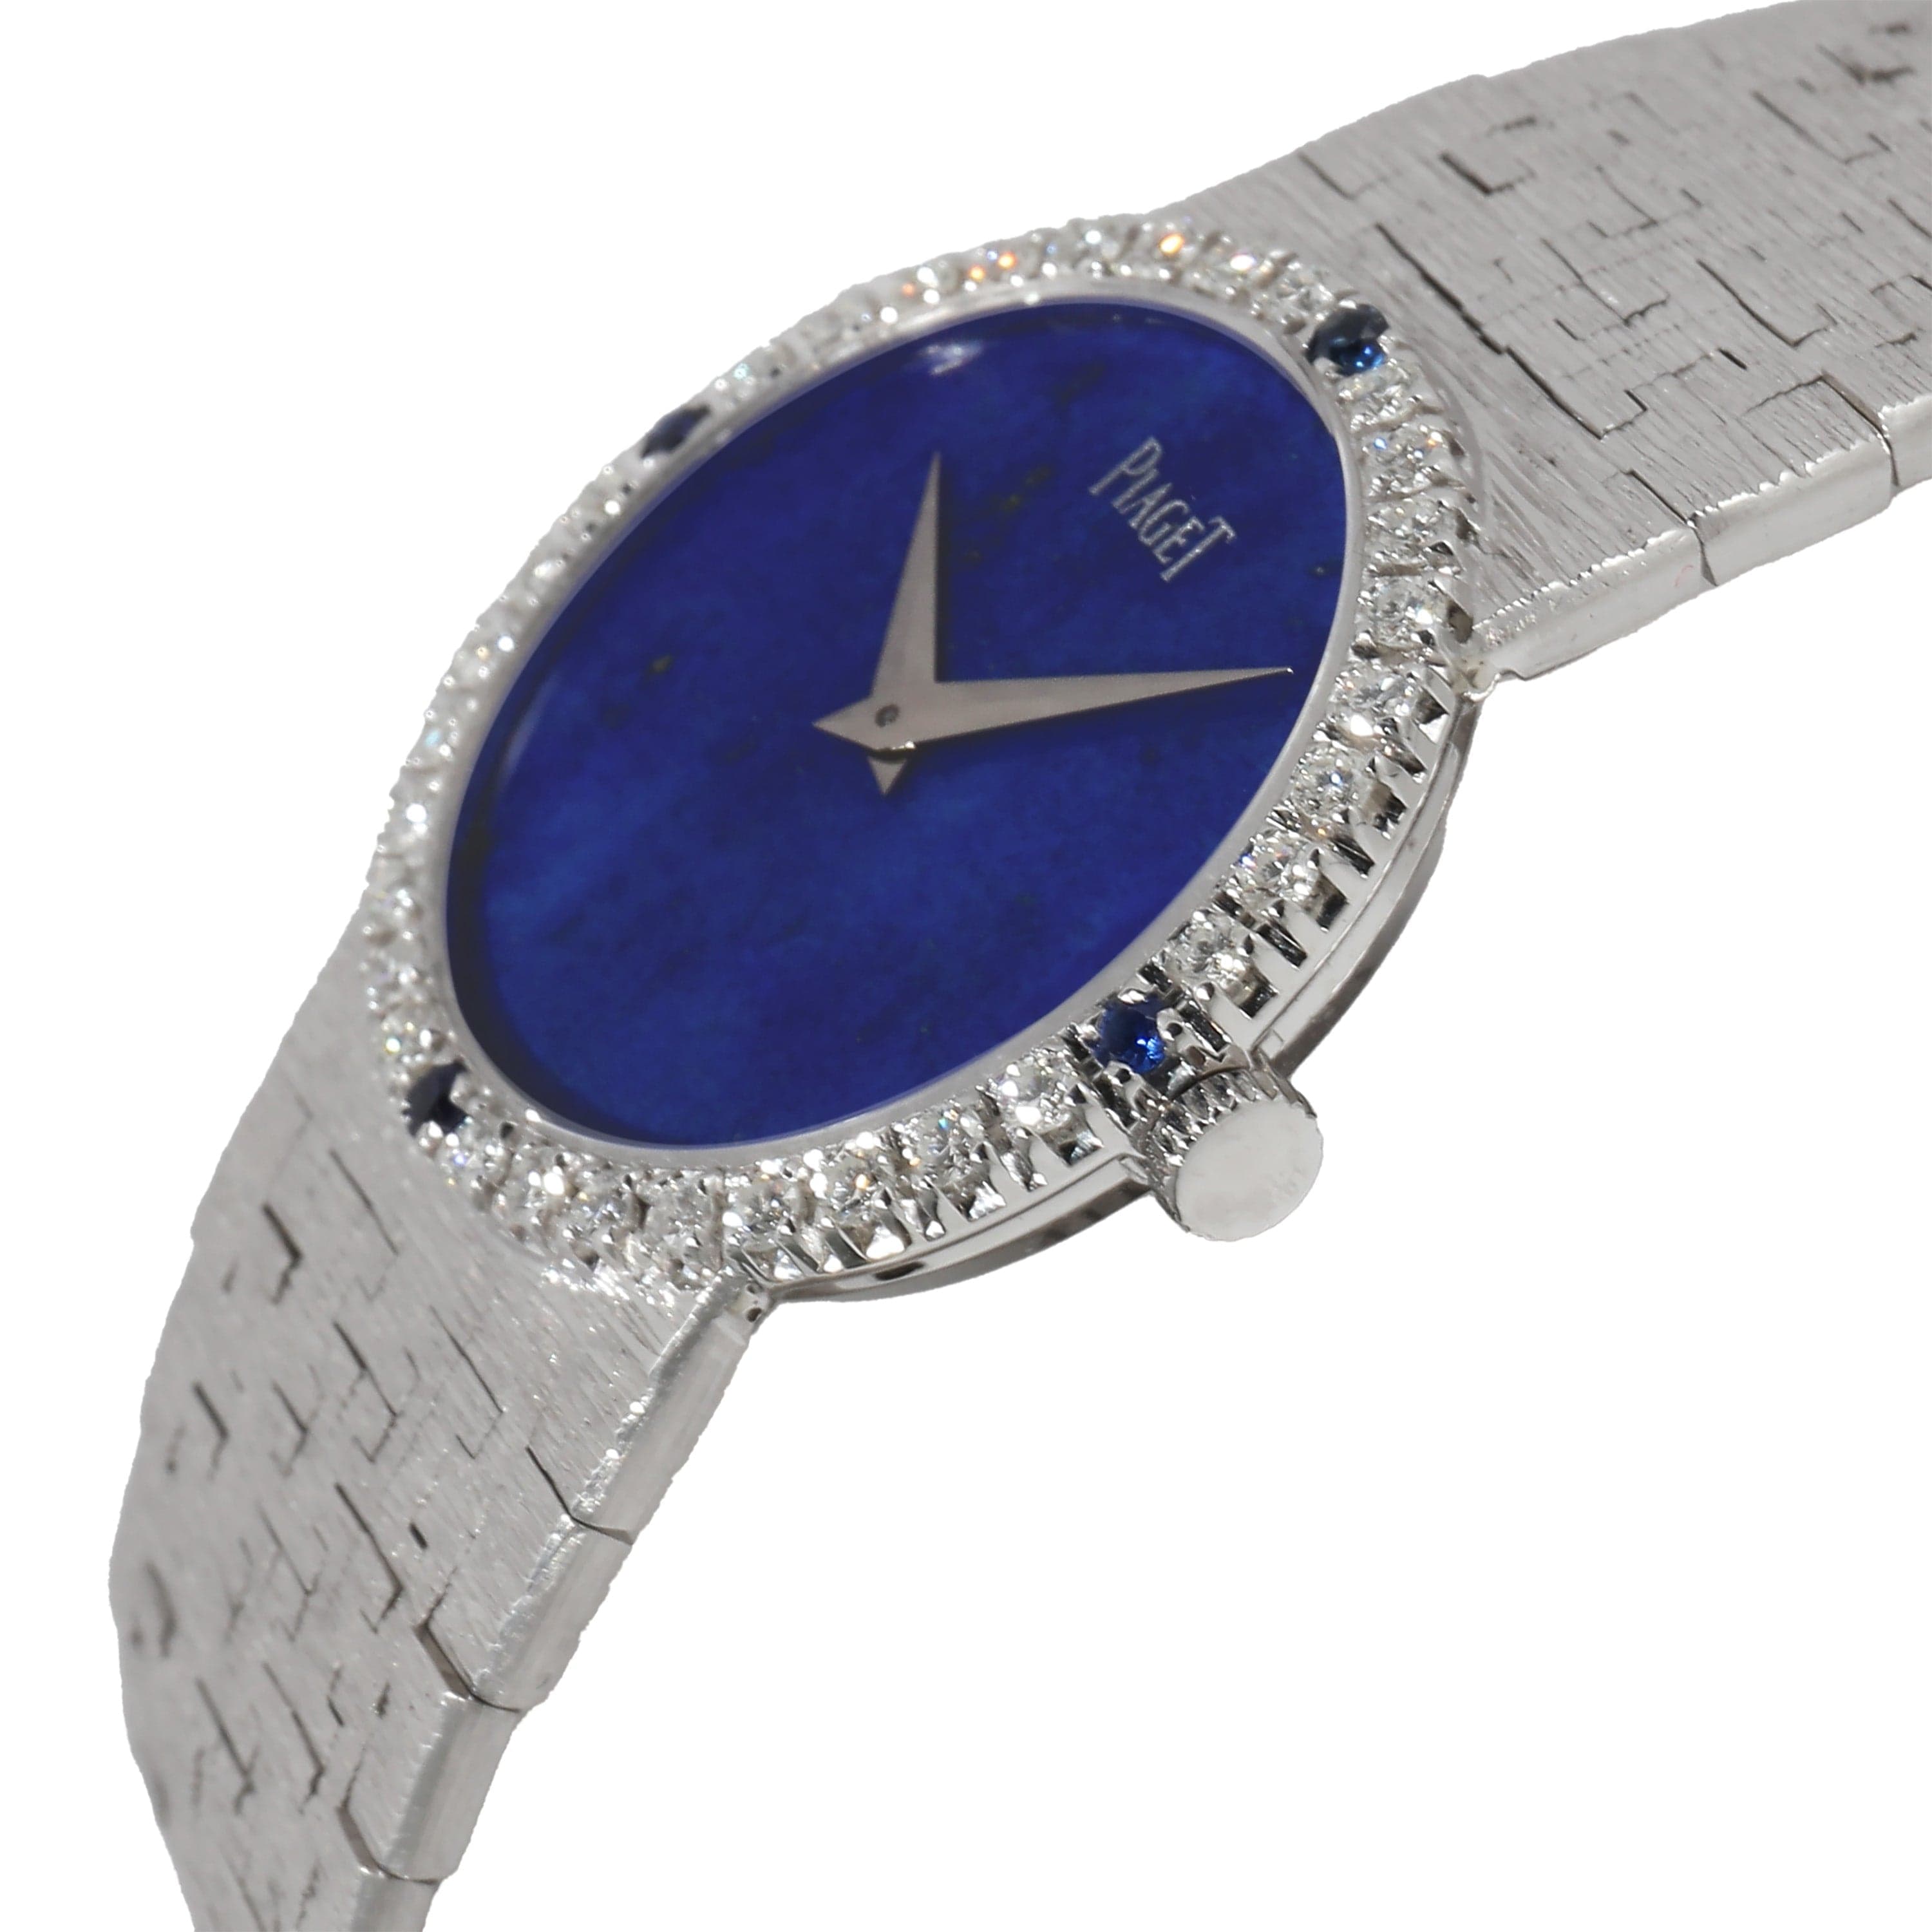 Piaget Piaget Classique 9706 A6 Women's Watch in 18kt White Gold